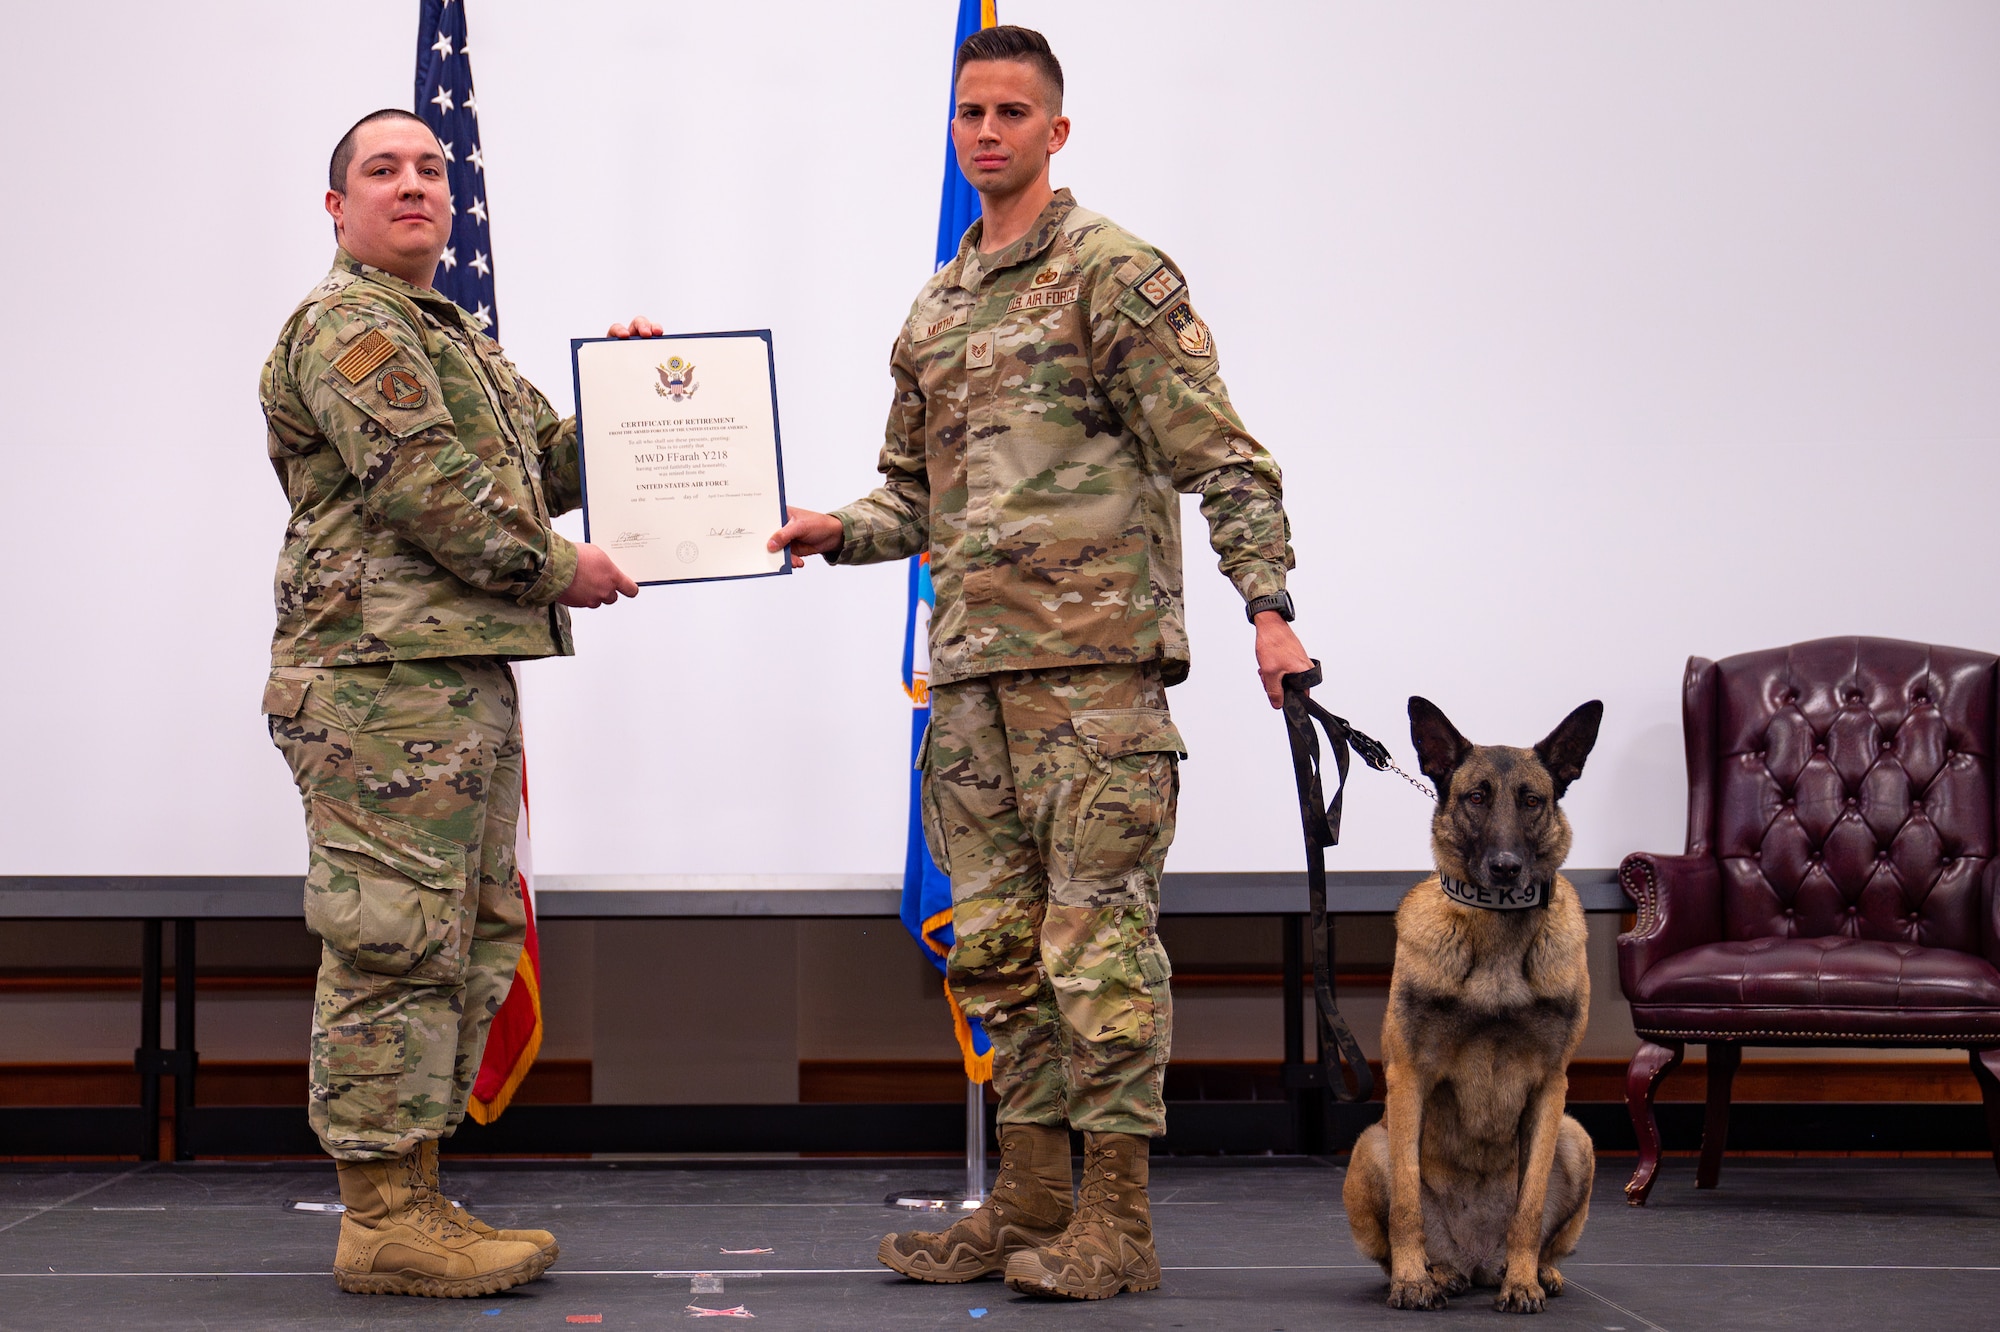 FFarah, military working dog, retires after 10 years of dedication to USAF